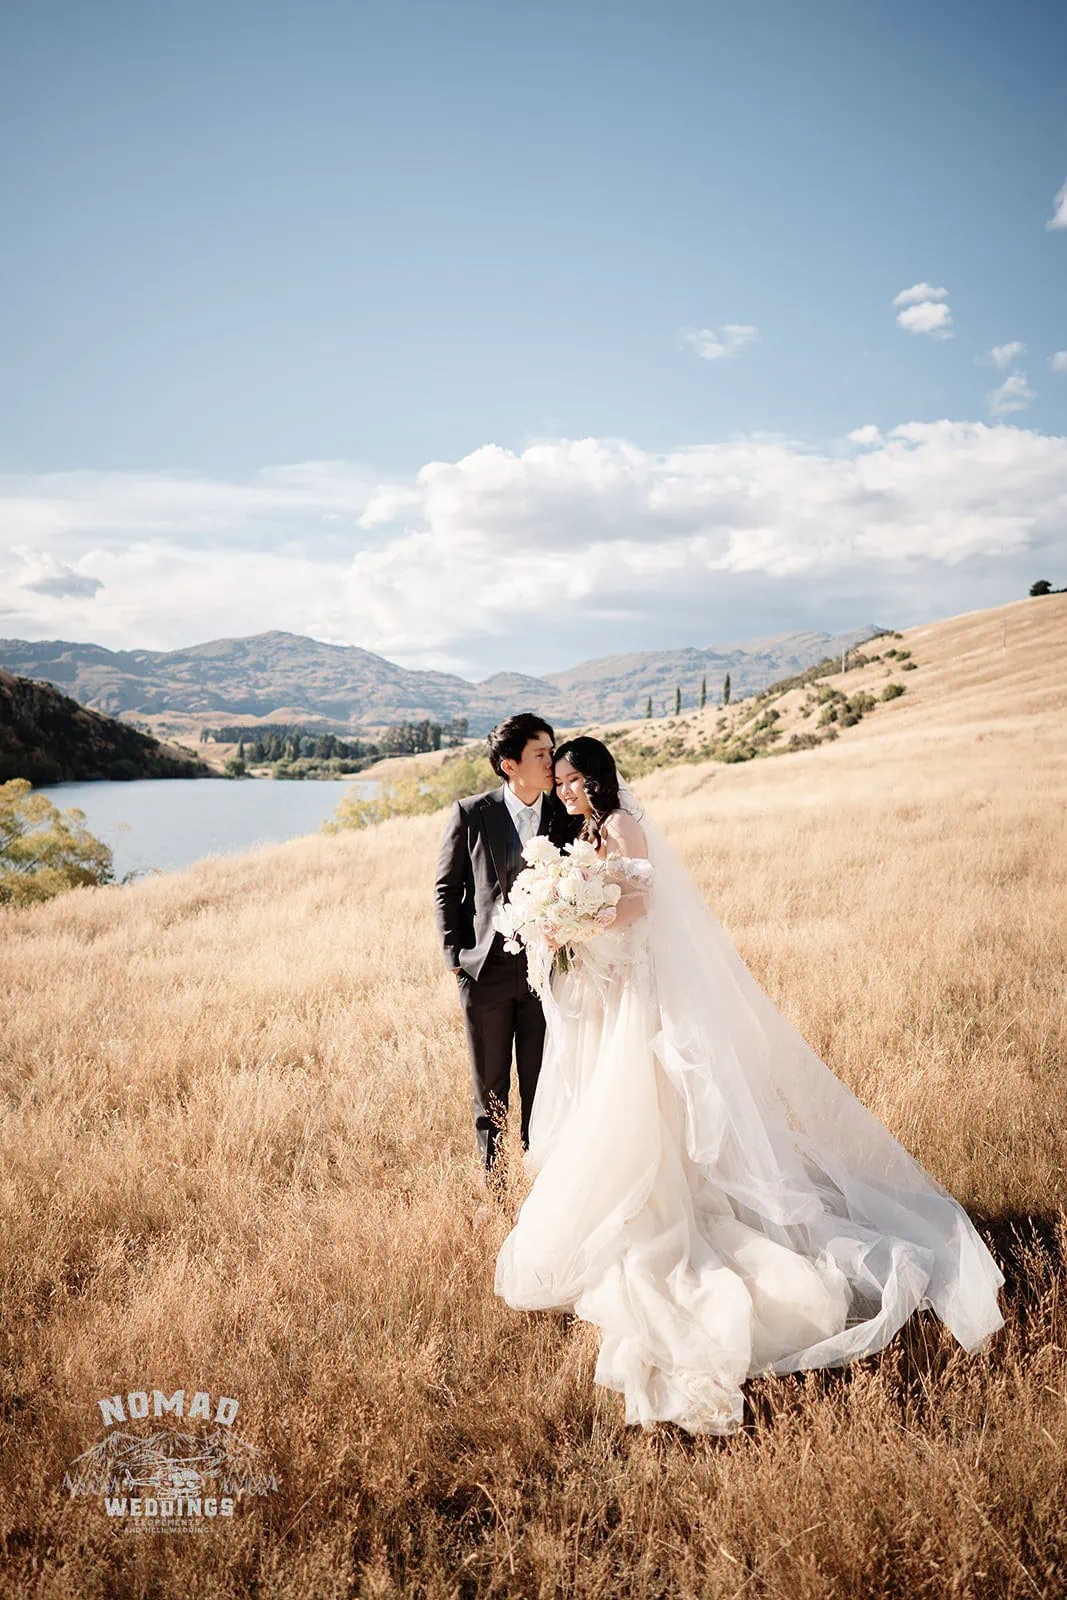 Queenstown New Zealand Elopement Wedding Photographer - A couple embracing in a field with a lake in the background, capturing the essence of summer in Queenstown.